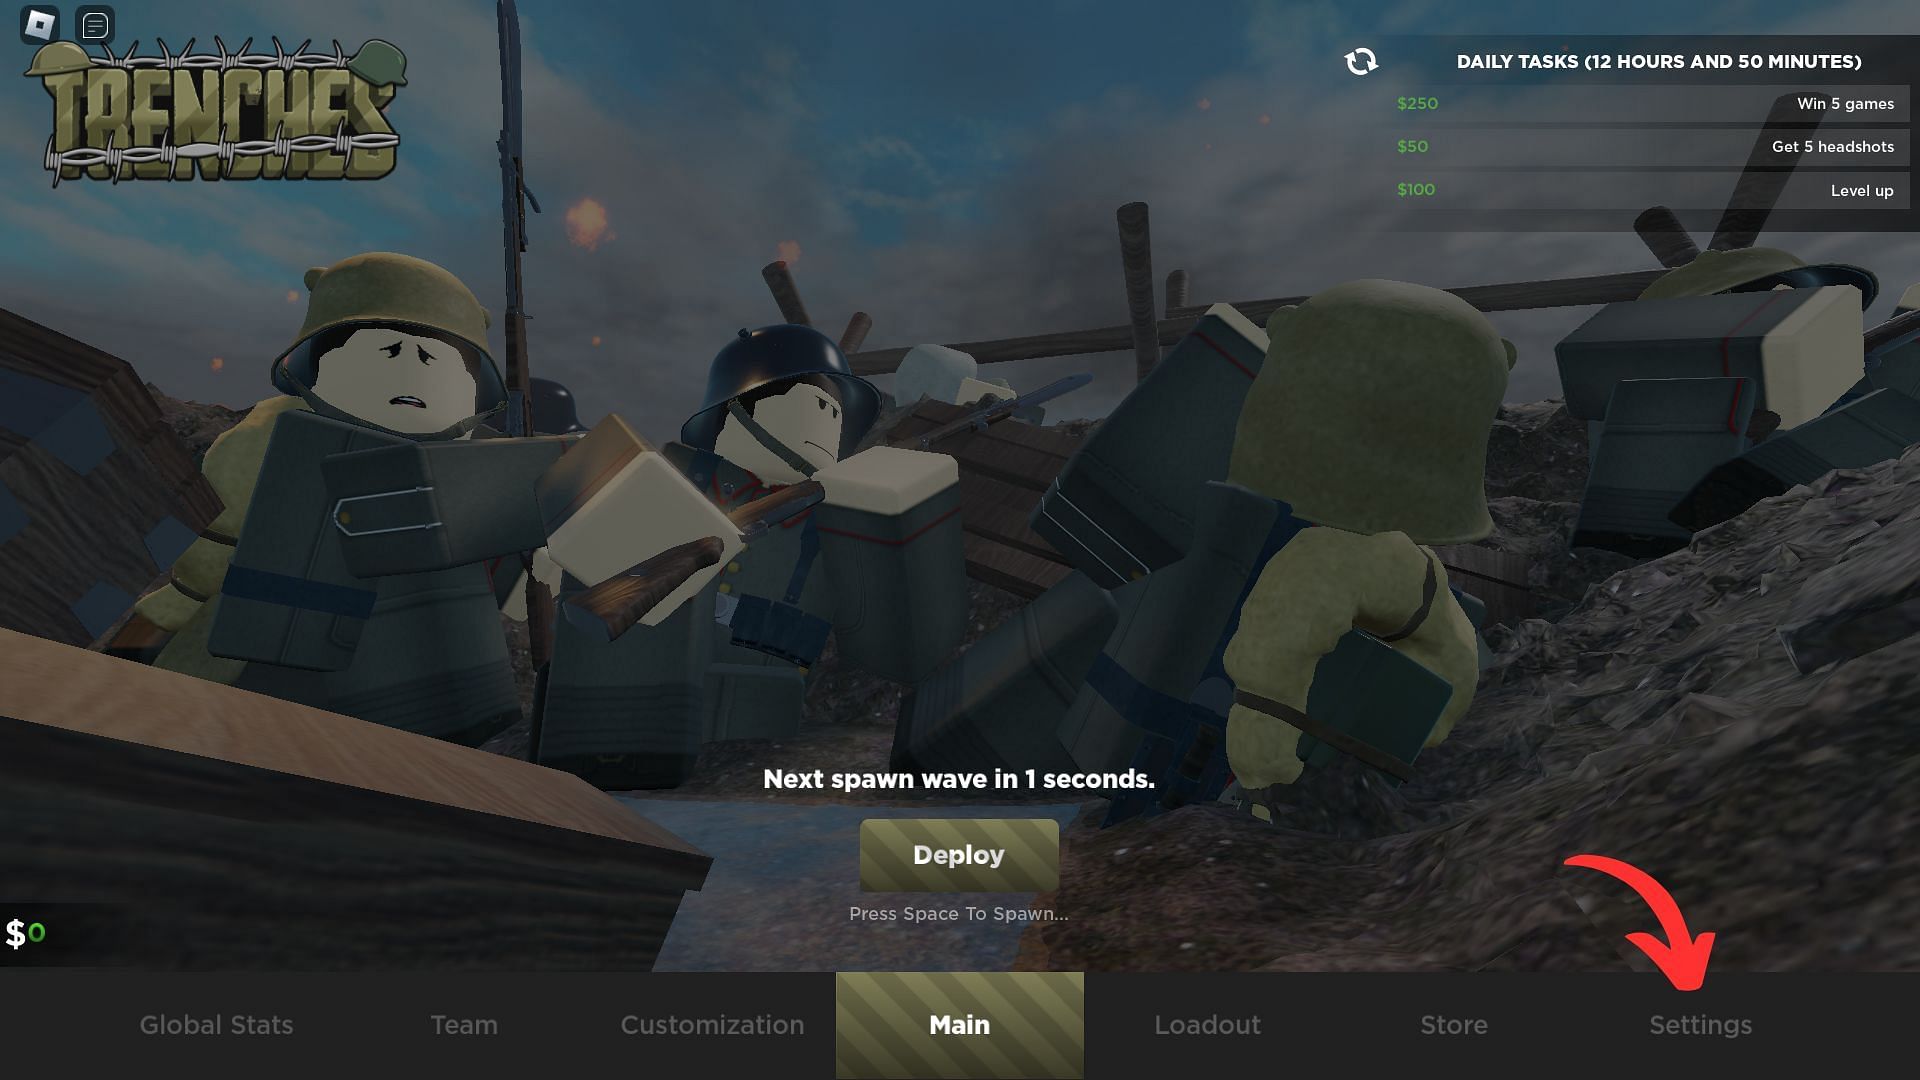 How to redeem codes for Trenches (Image via Roblox and Sportskeeda)